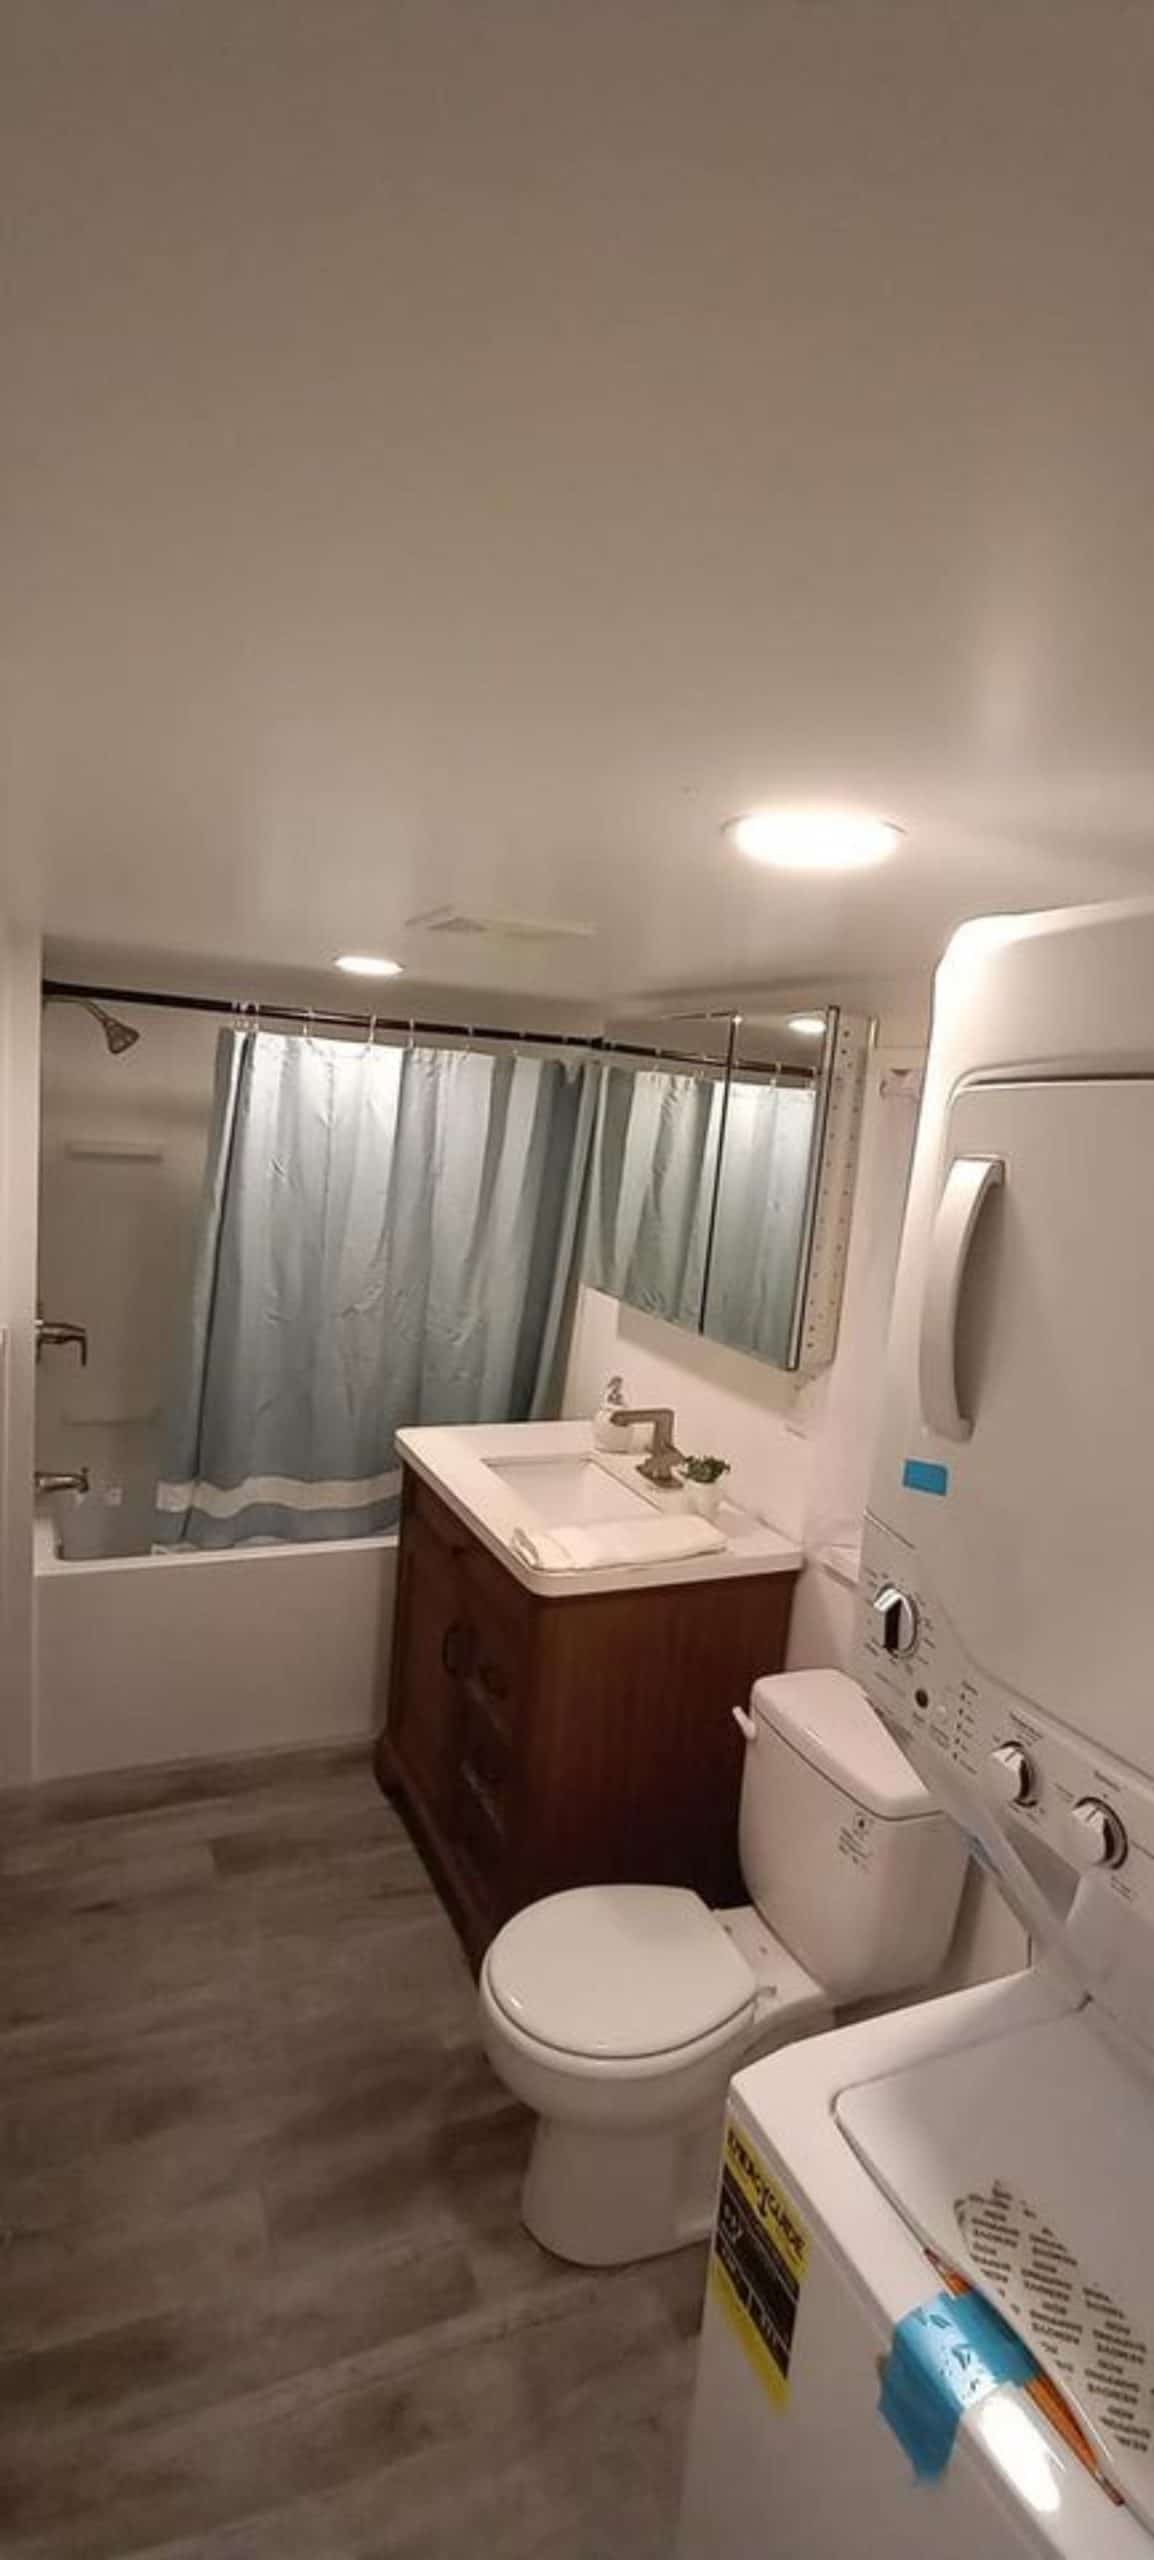 Bathroom of 400 sf Tiny House has washer dryer, standard toilet, sink with vanity and mirror nd bathtub